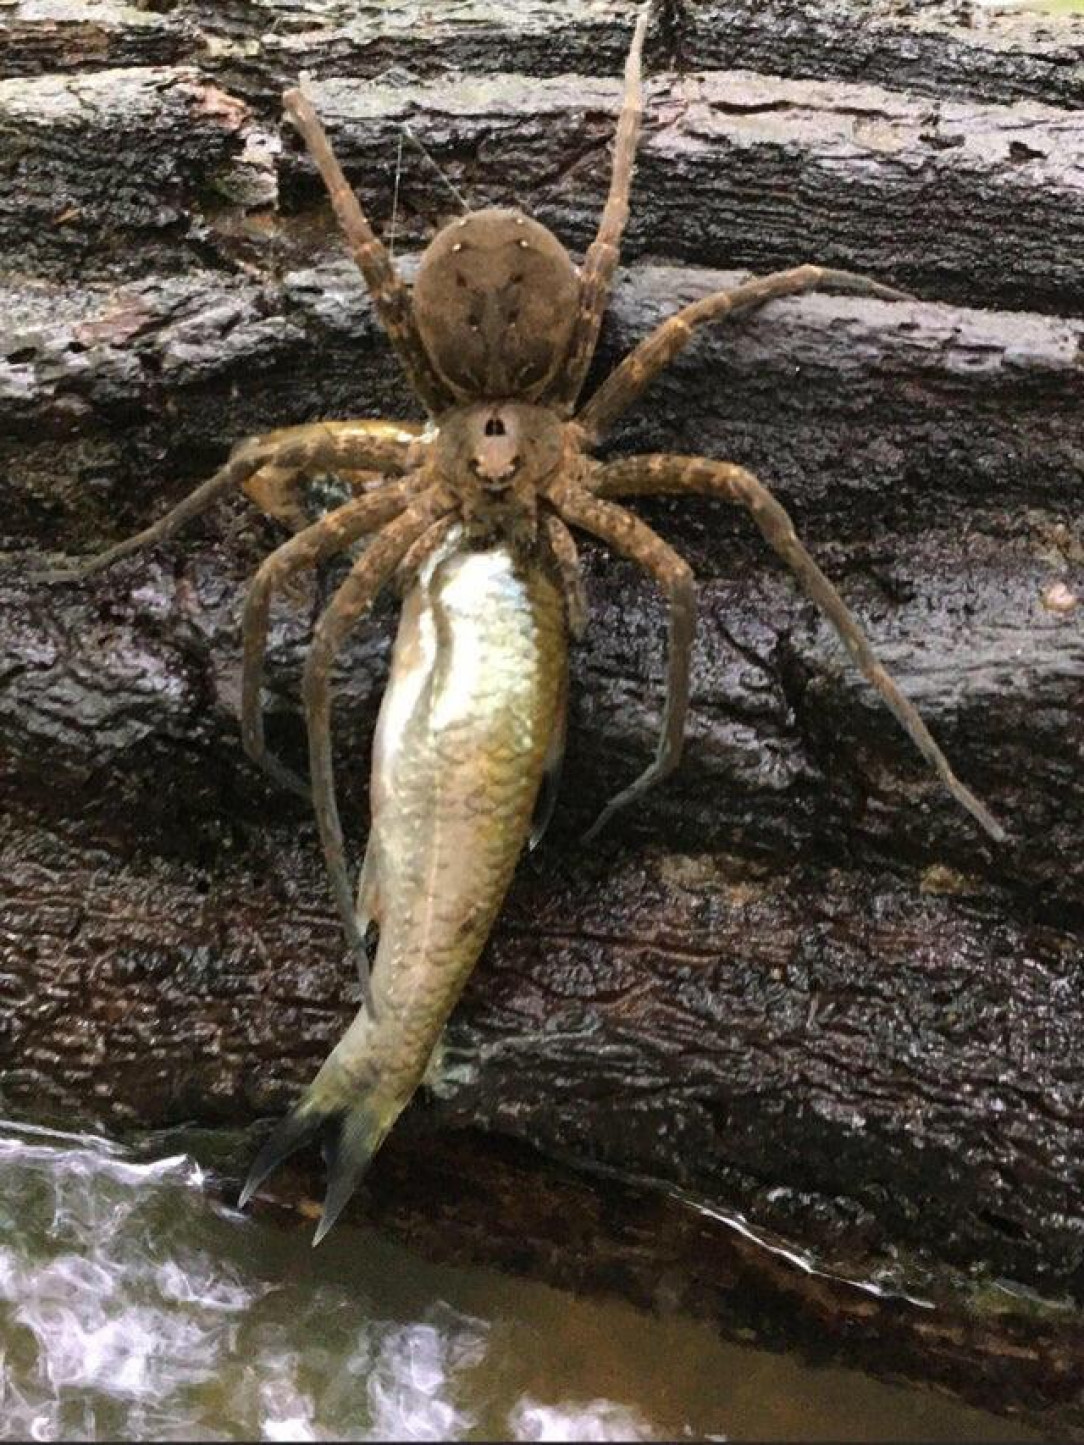 This spider fishes for mother&#039;s day